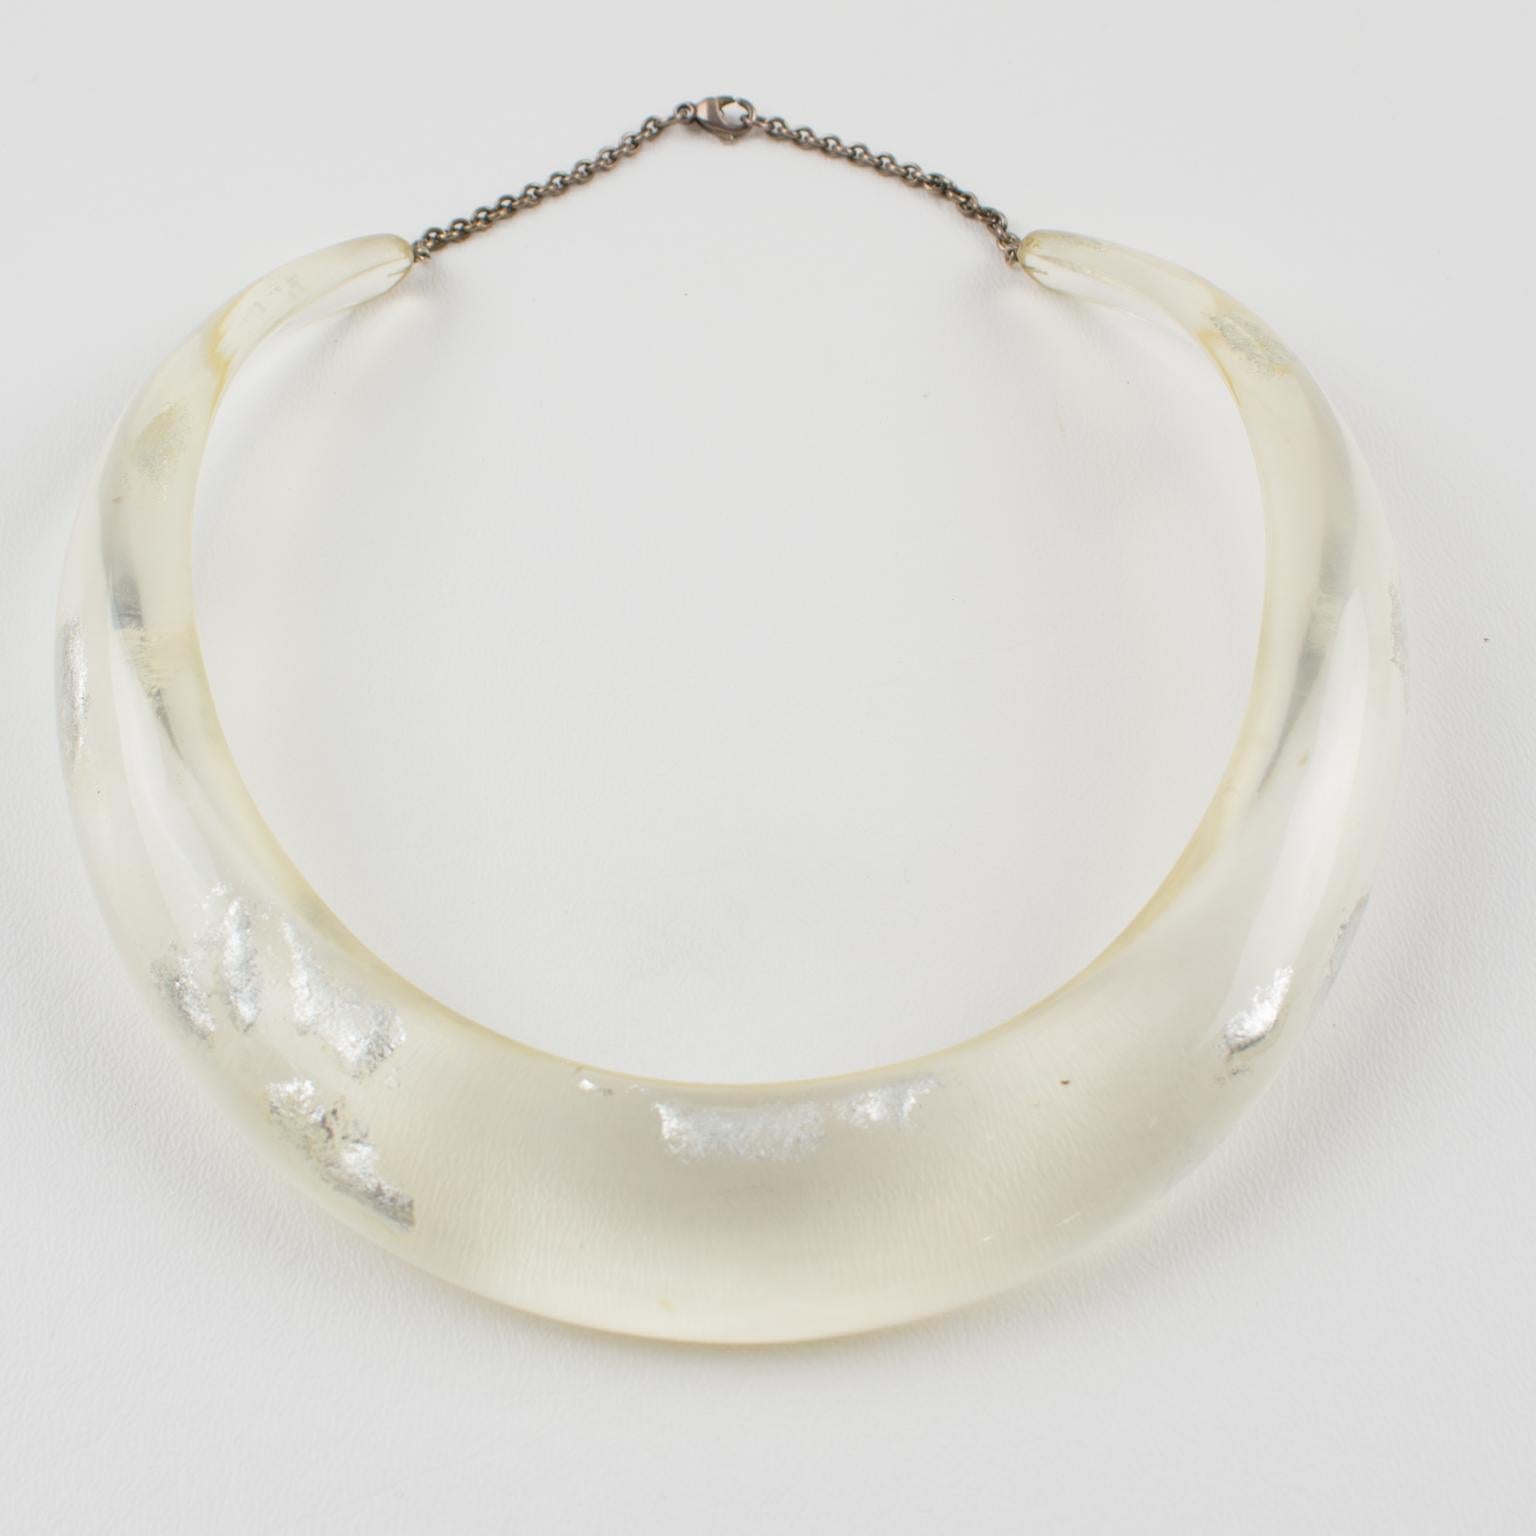 This elegant Italian artisan-designer studio collar choker necklace boasts a Lucite or resin rigid bib shape in translucent clear color complimented with silver flakes inclusions in an organic abstract free-form design. A silvered metal chain helps